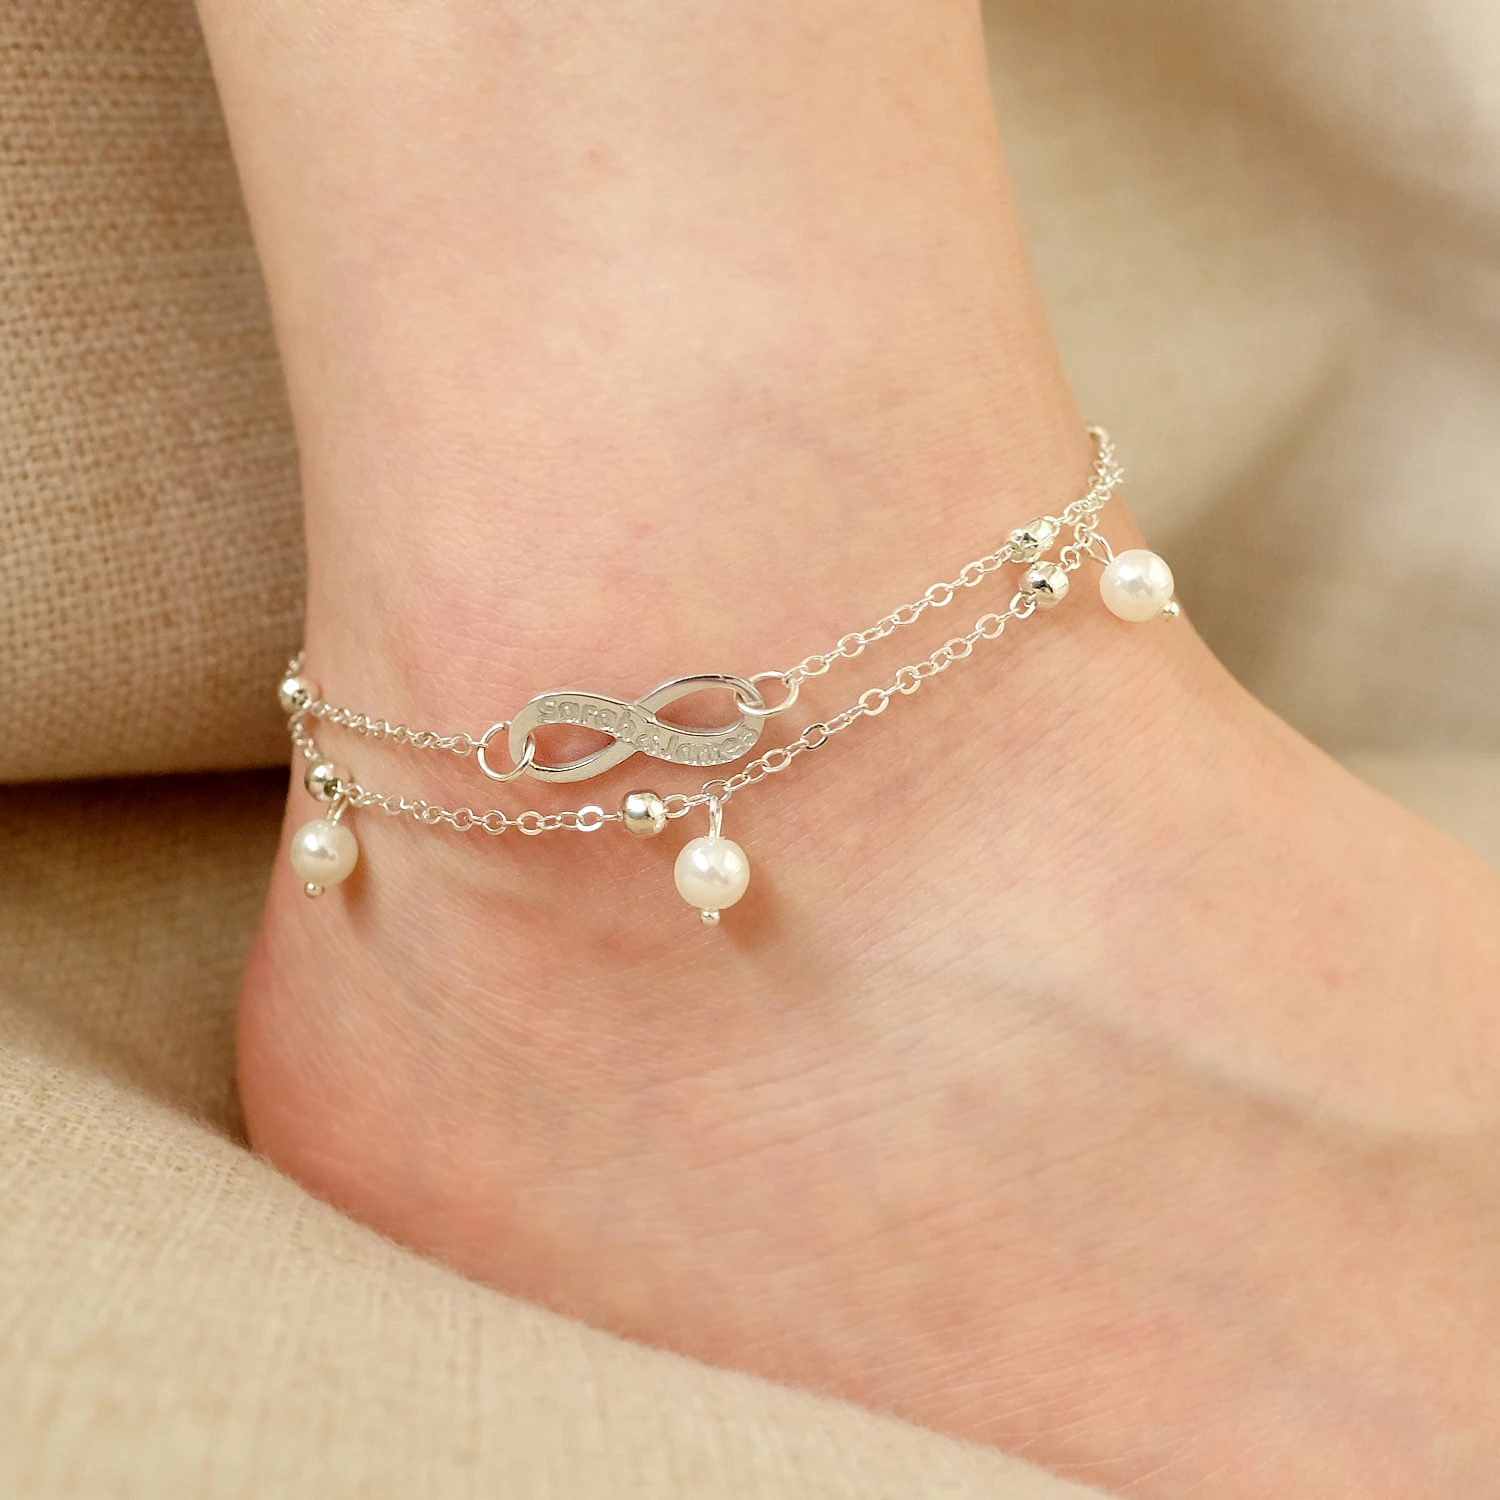 Custom Name Anklet Foot Chain Personalize Anklets for Women Bohemian Beach Jewelry Infinity Anklet Bridesmaid Gift for Her body jewelry bohemian beading alloy anklet in silver size one size